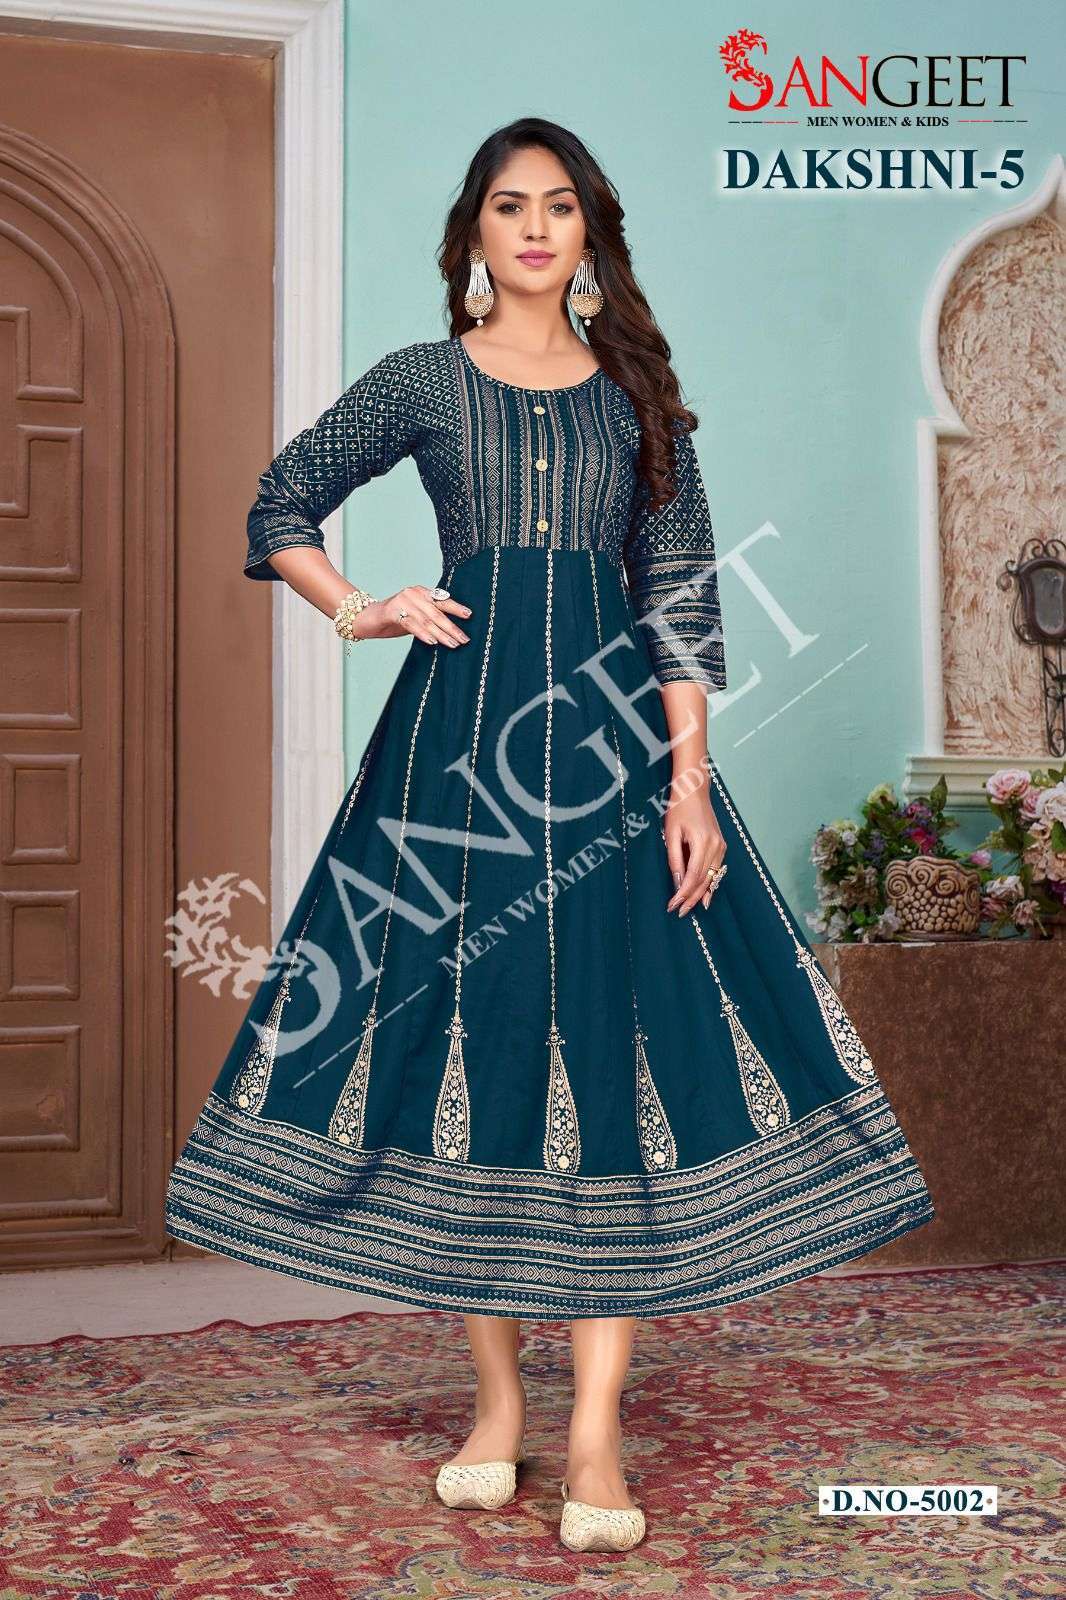 Aashirwad - Anaya 8203 colors - gowns under 2300/- at wholesale.